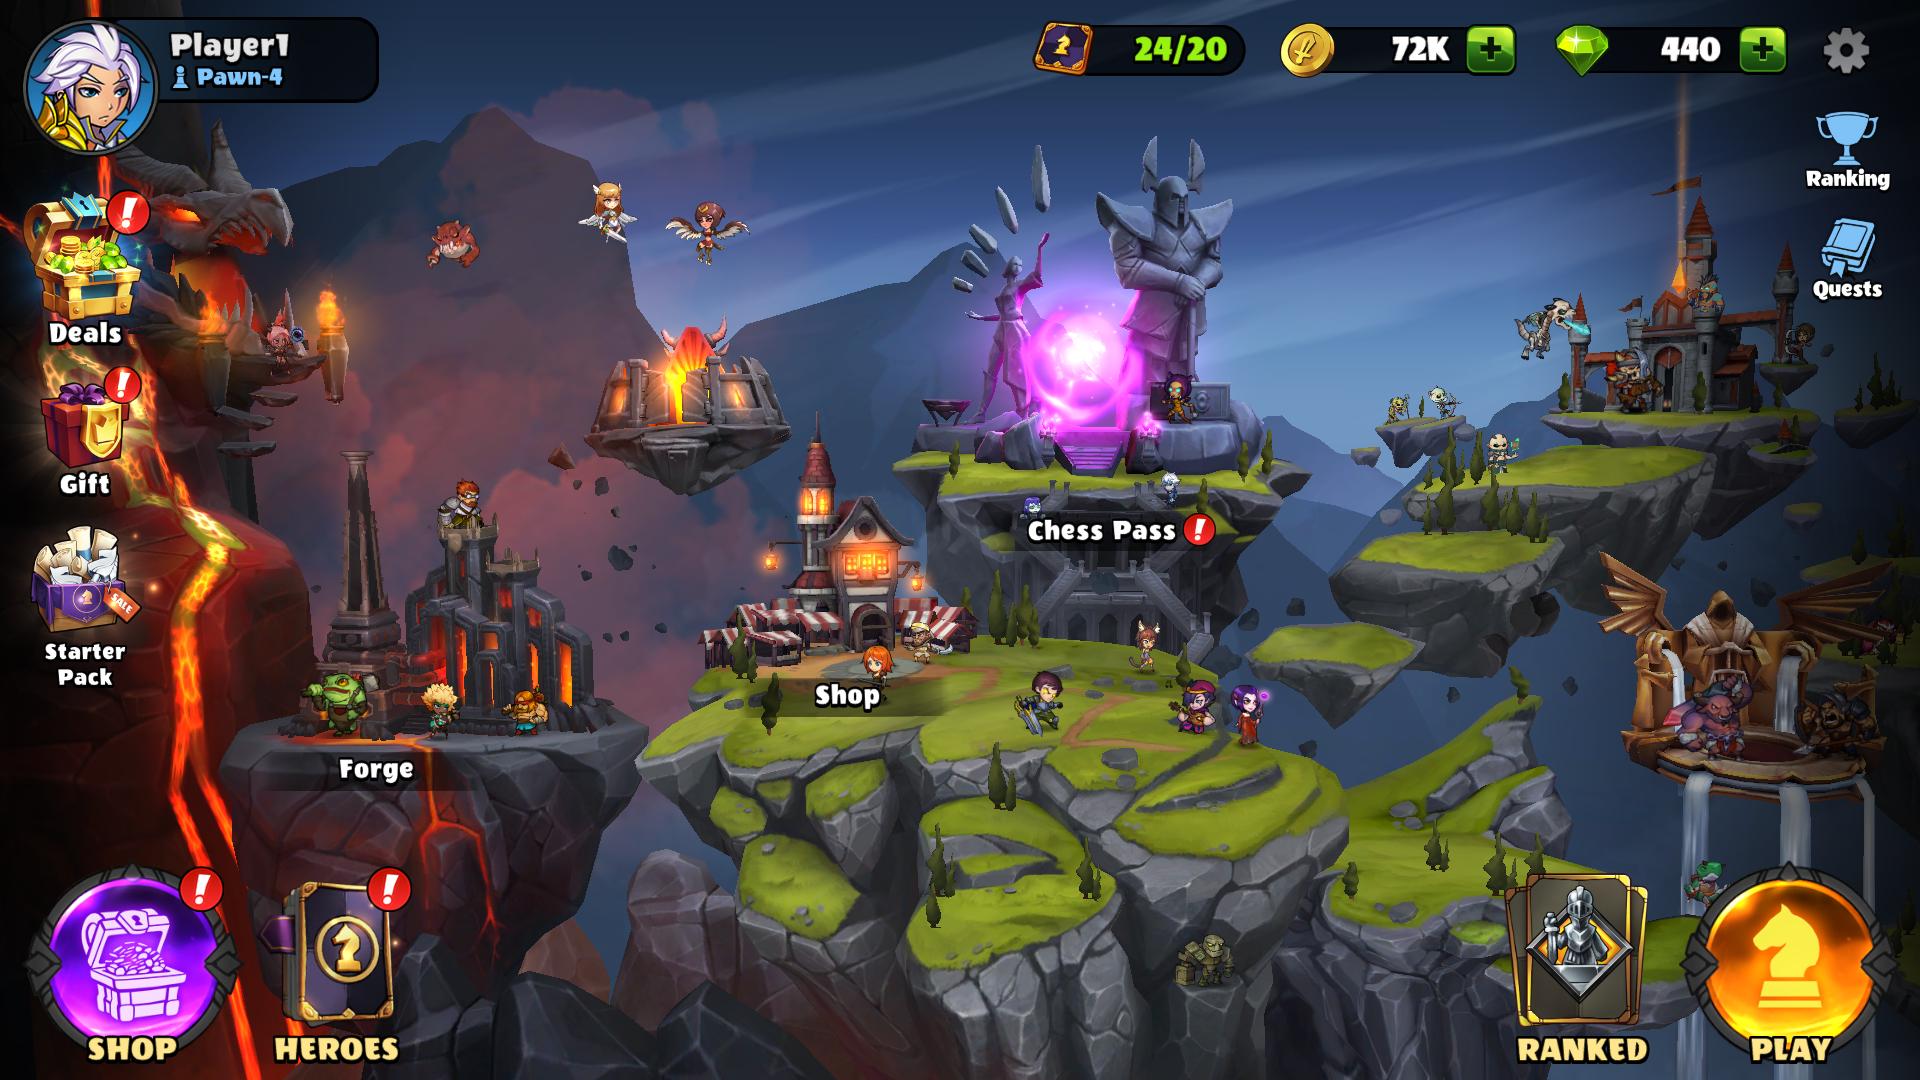 10 Best Auto Chess Games For Android and iOS (2020)